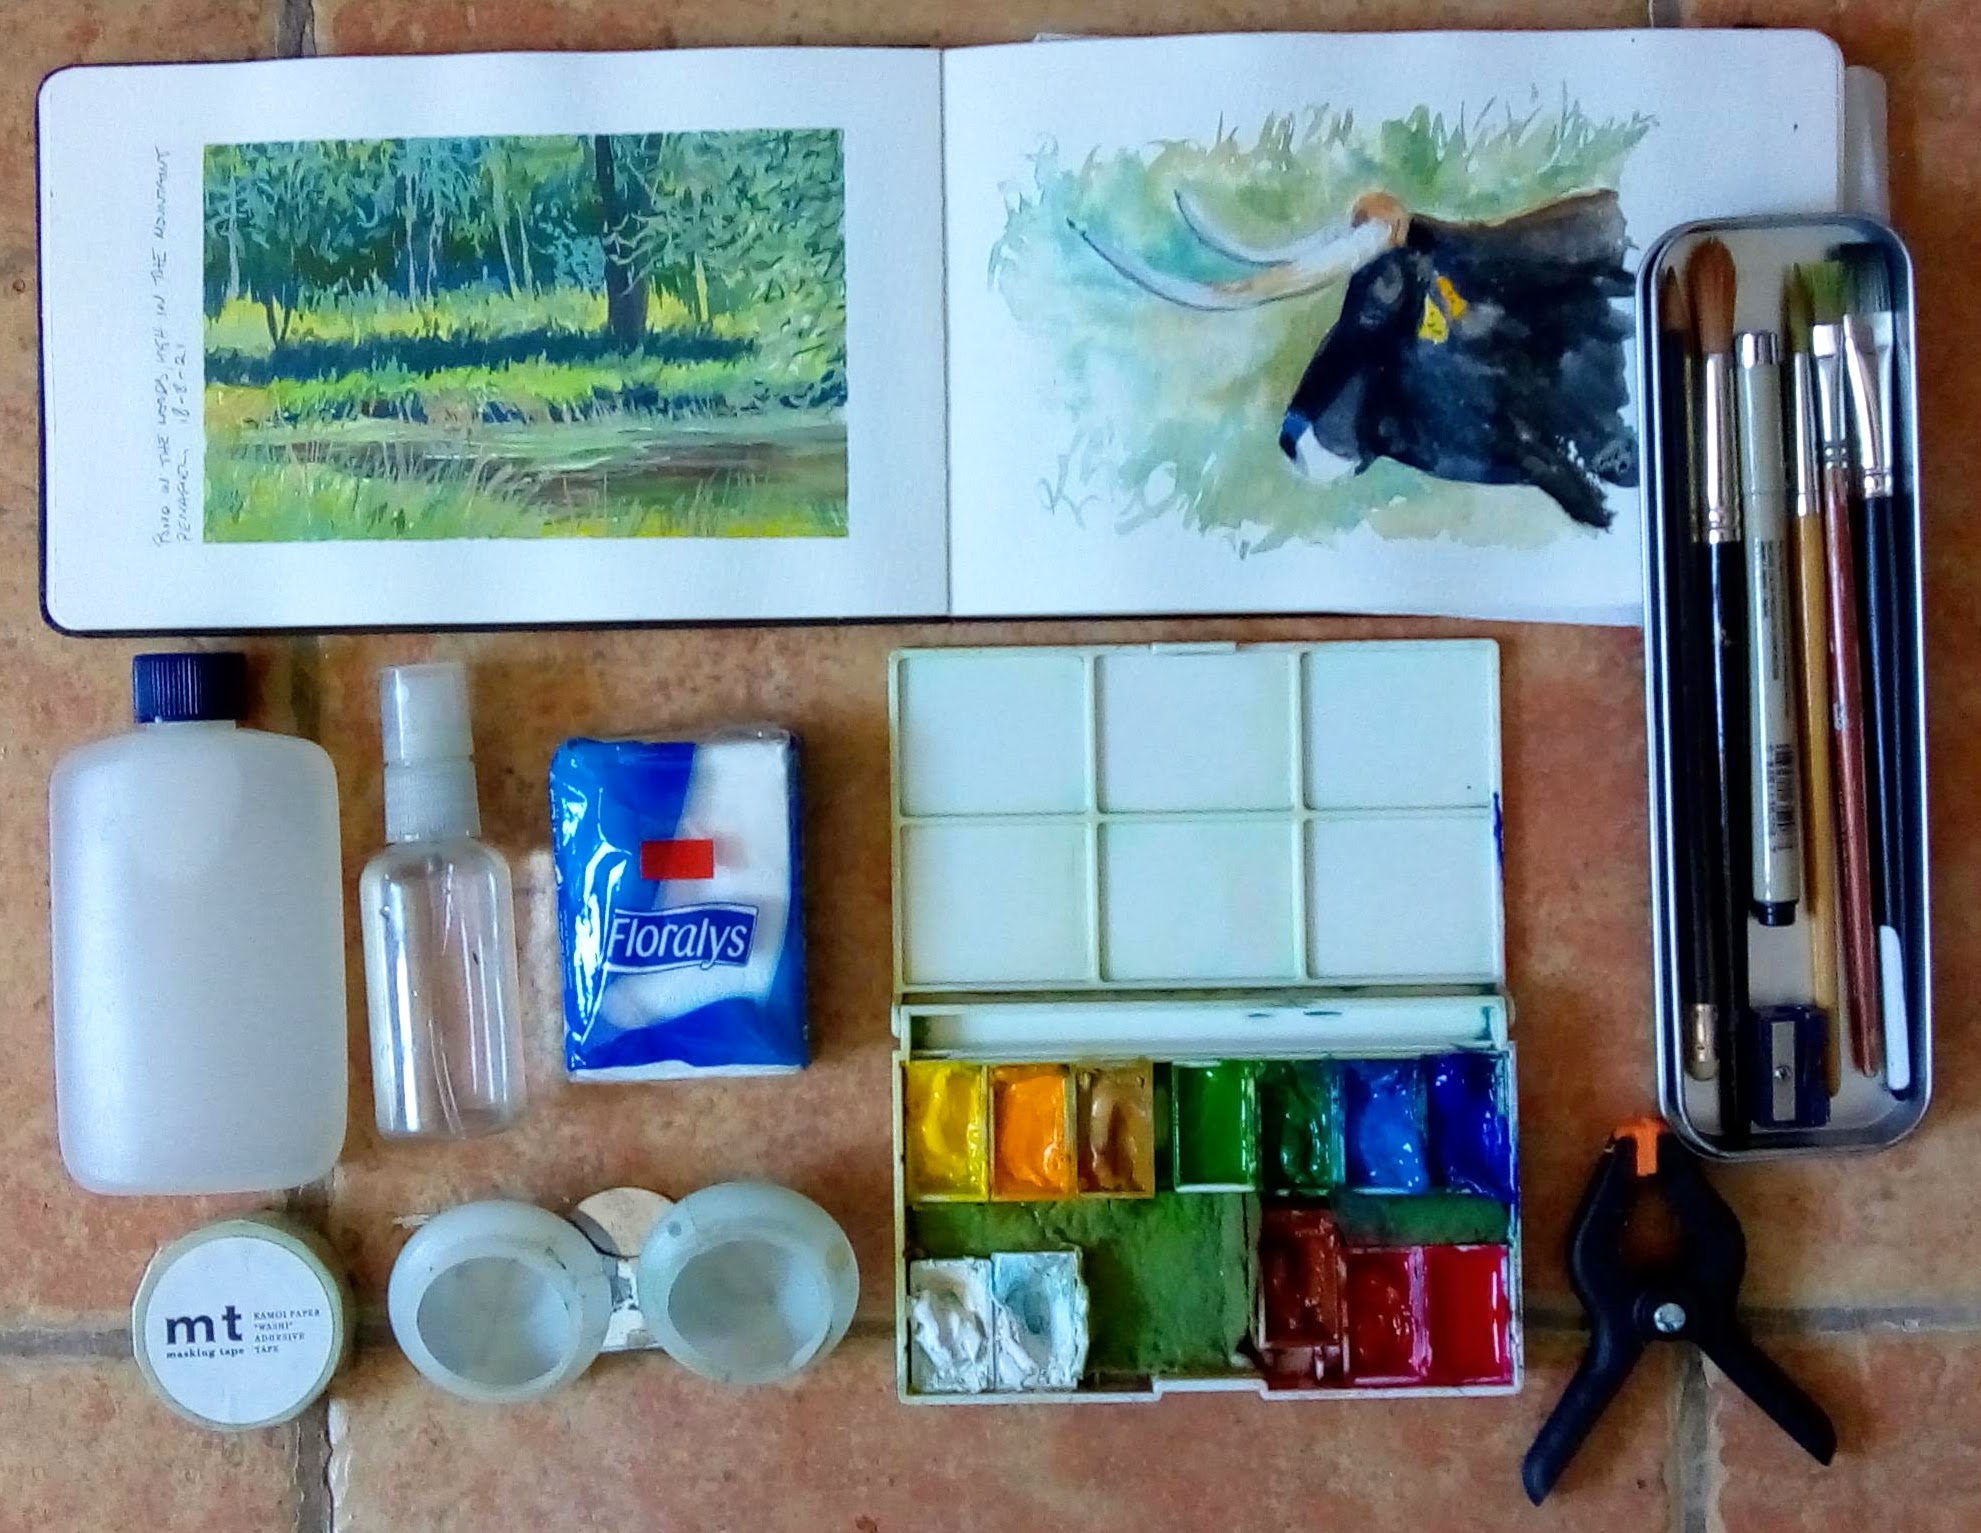 How to Use White Gouache to Touch Up Your Art 